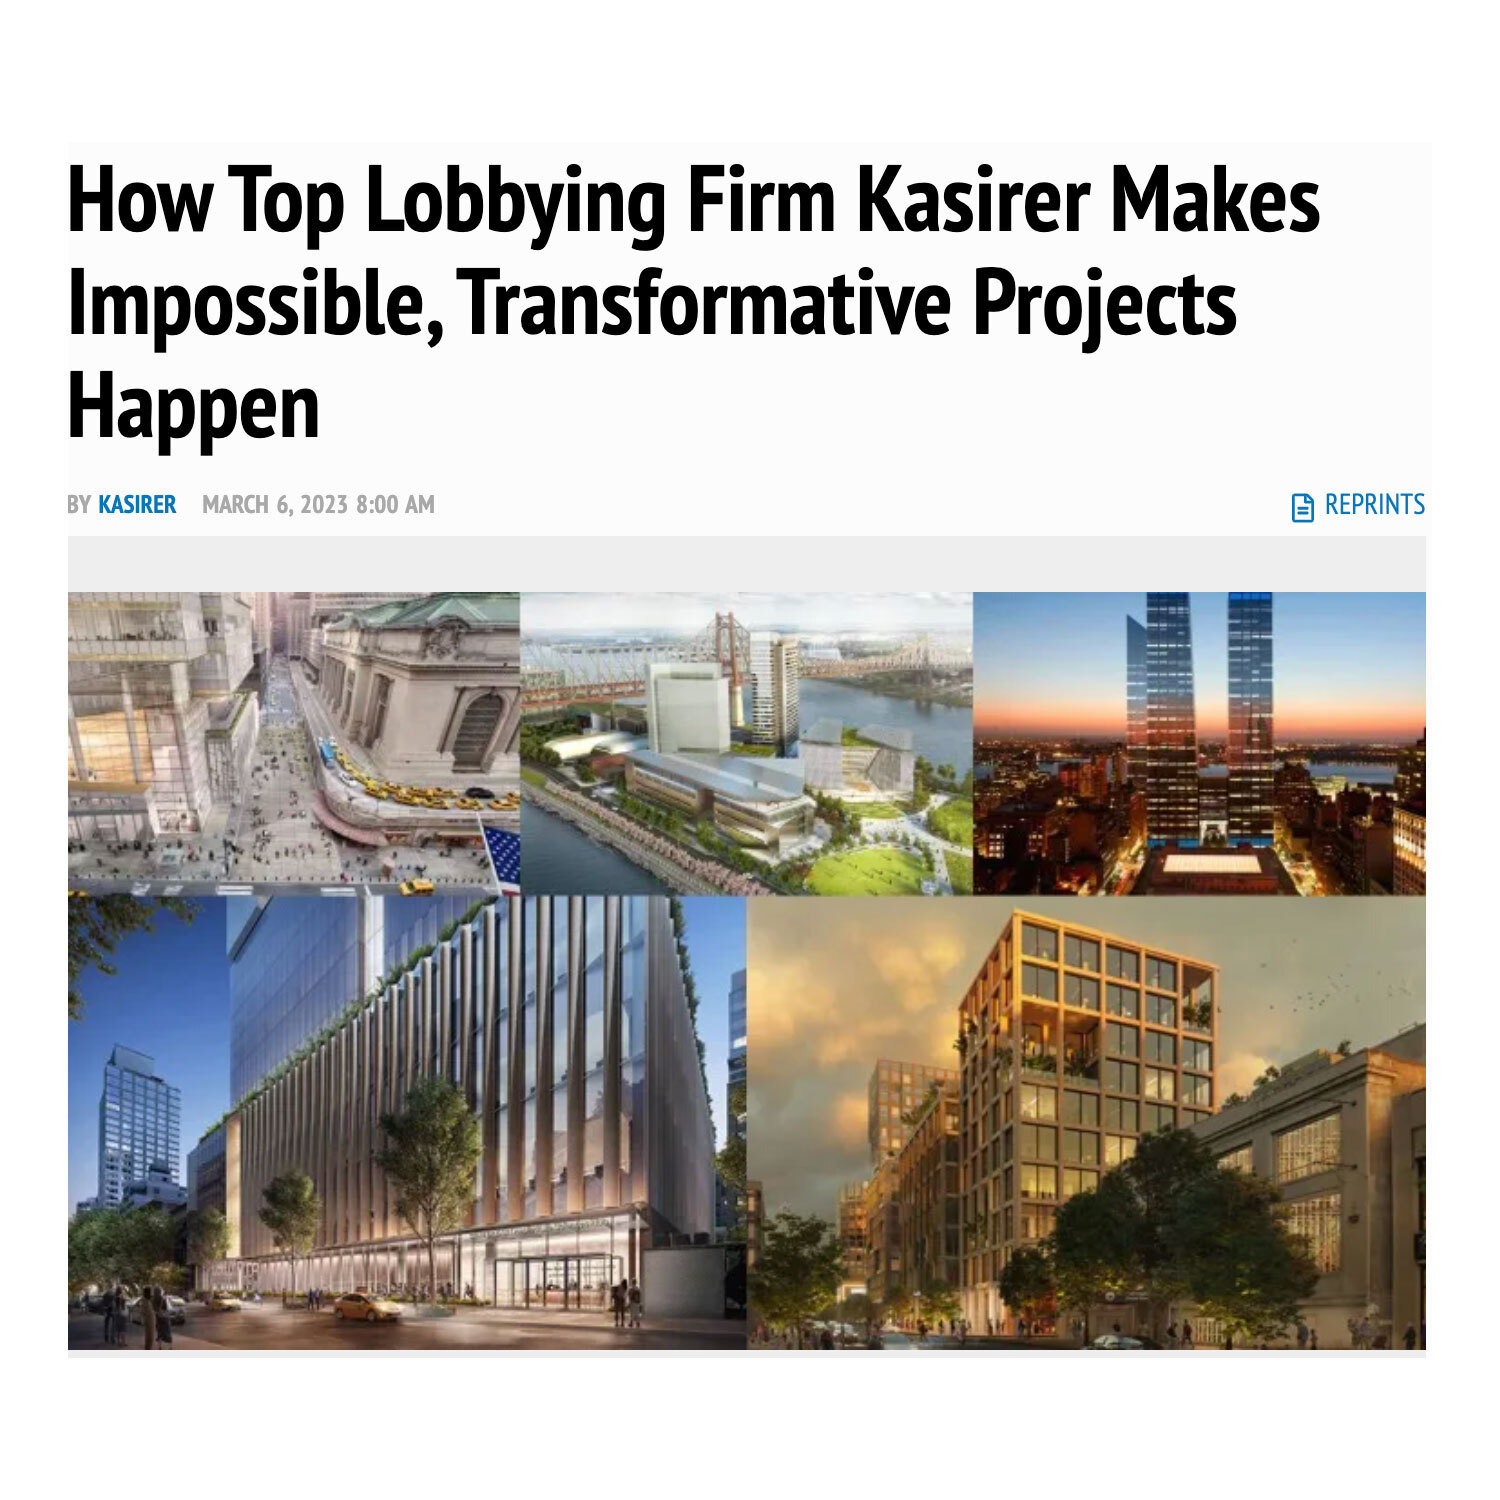 Kasirer Makes Impossible, Transformative Projects Happen